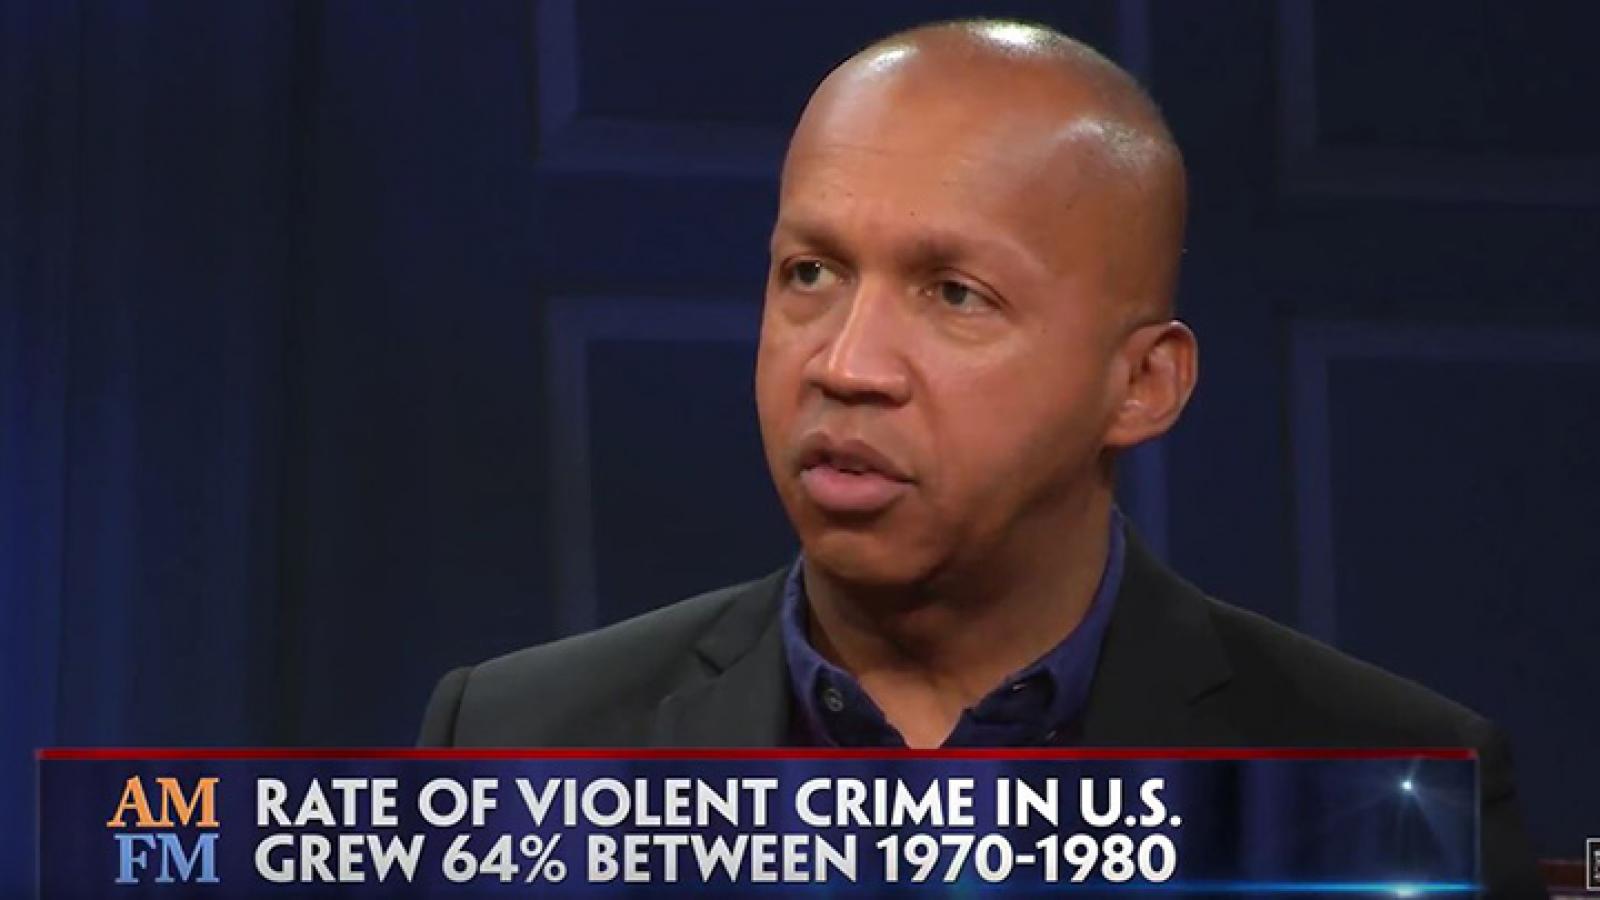 Civil rights lawyer Bryan Stevenson on the long-term effects of the "war on drugs"